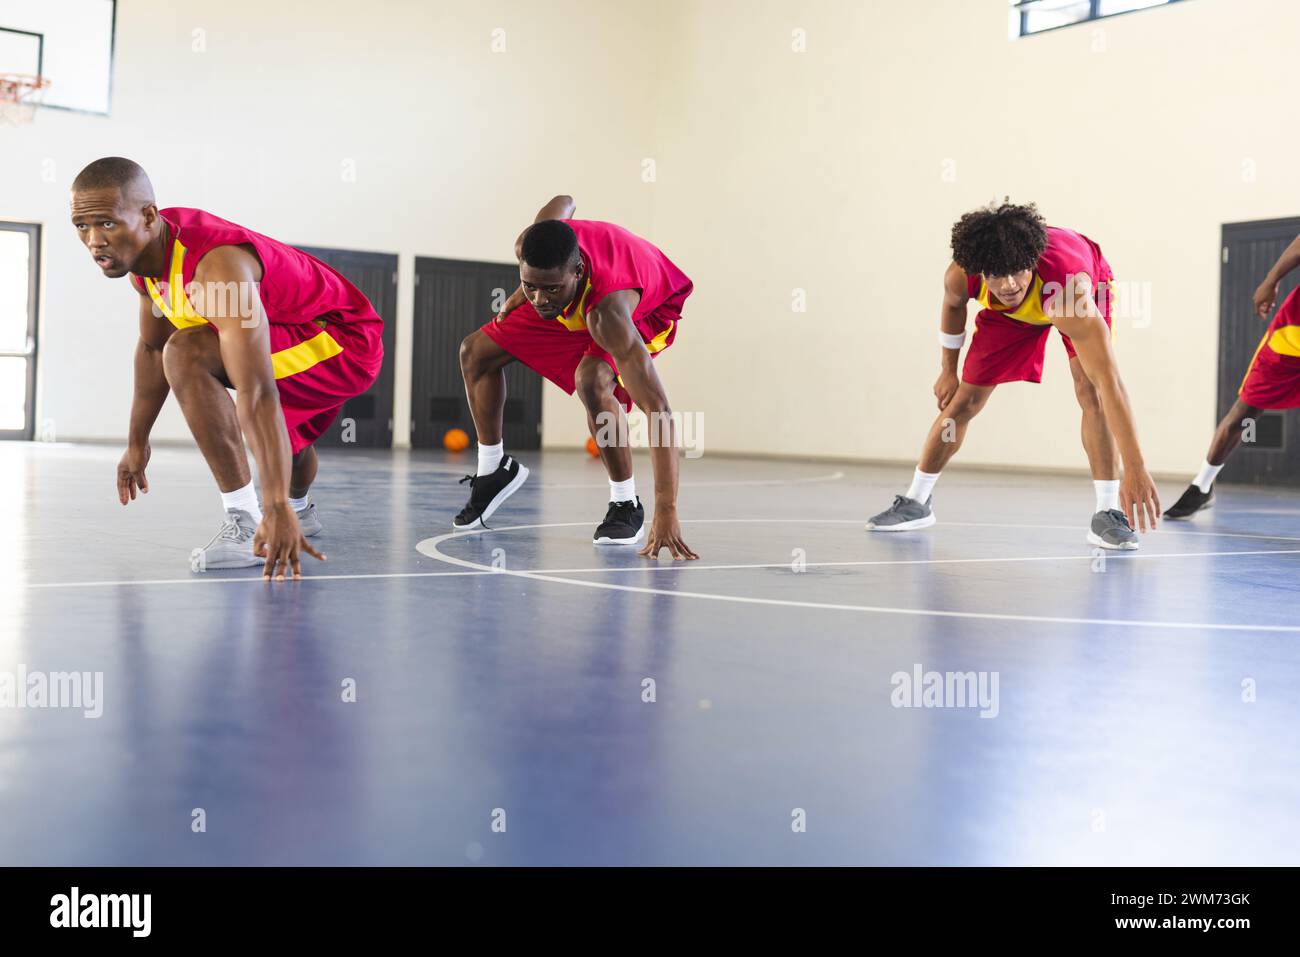 Diverse basketball players practice in an indoor court Stock Photo